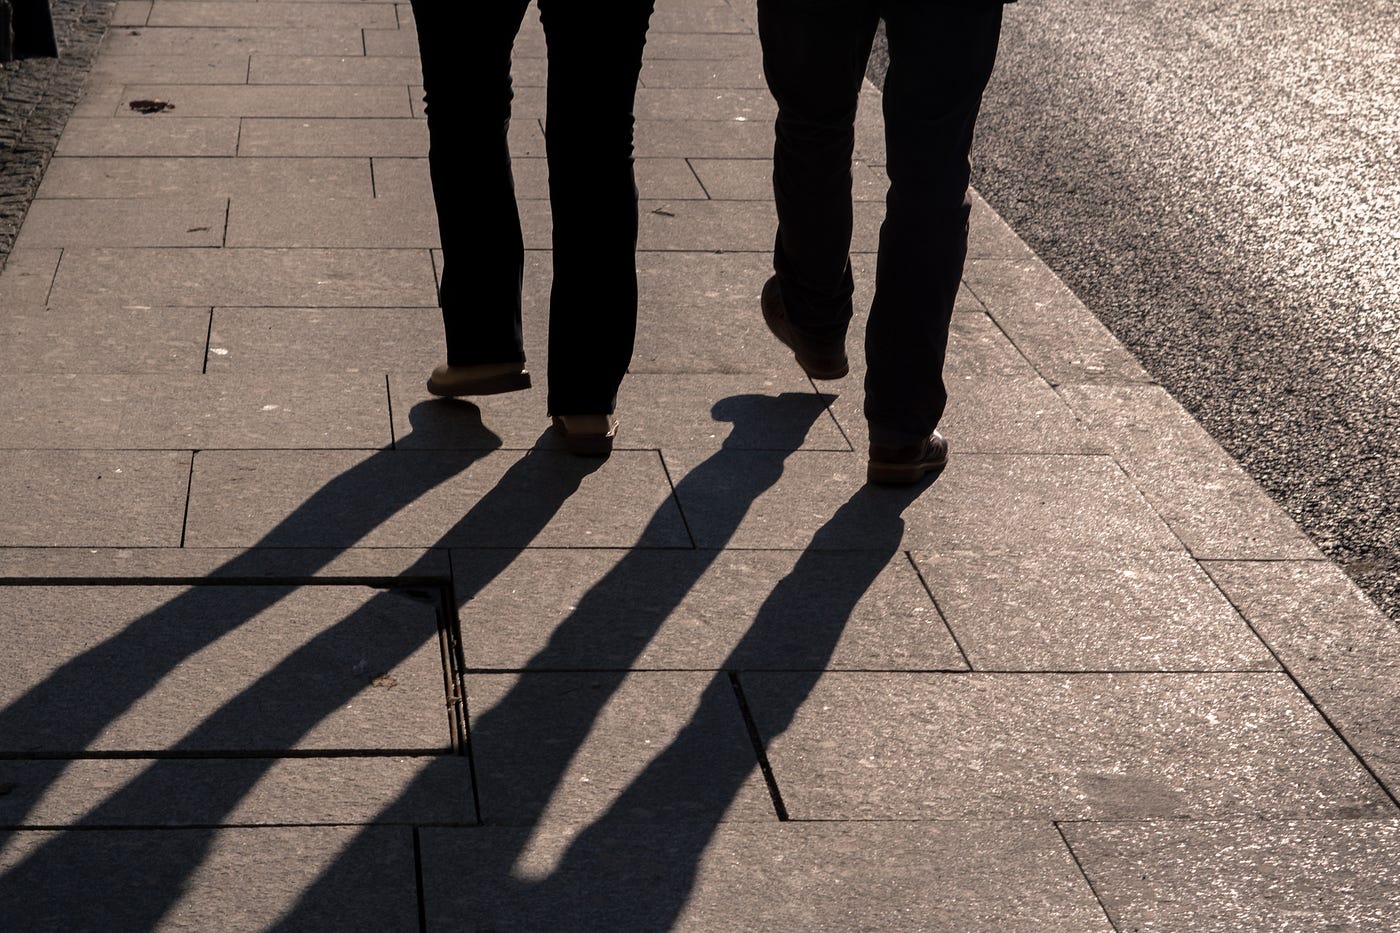 We see two sets of legs walking away from us on a sidewalk with pavers. Nothing visible from upper legs up. Shadows come off each of the legs, towards us. Black and white image.